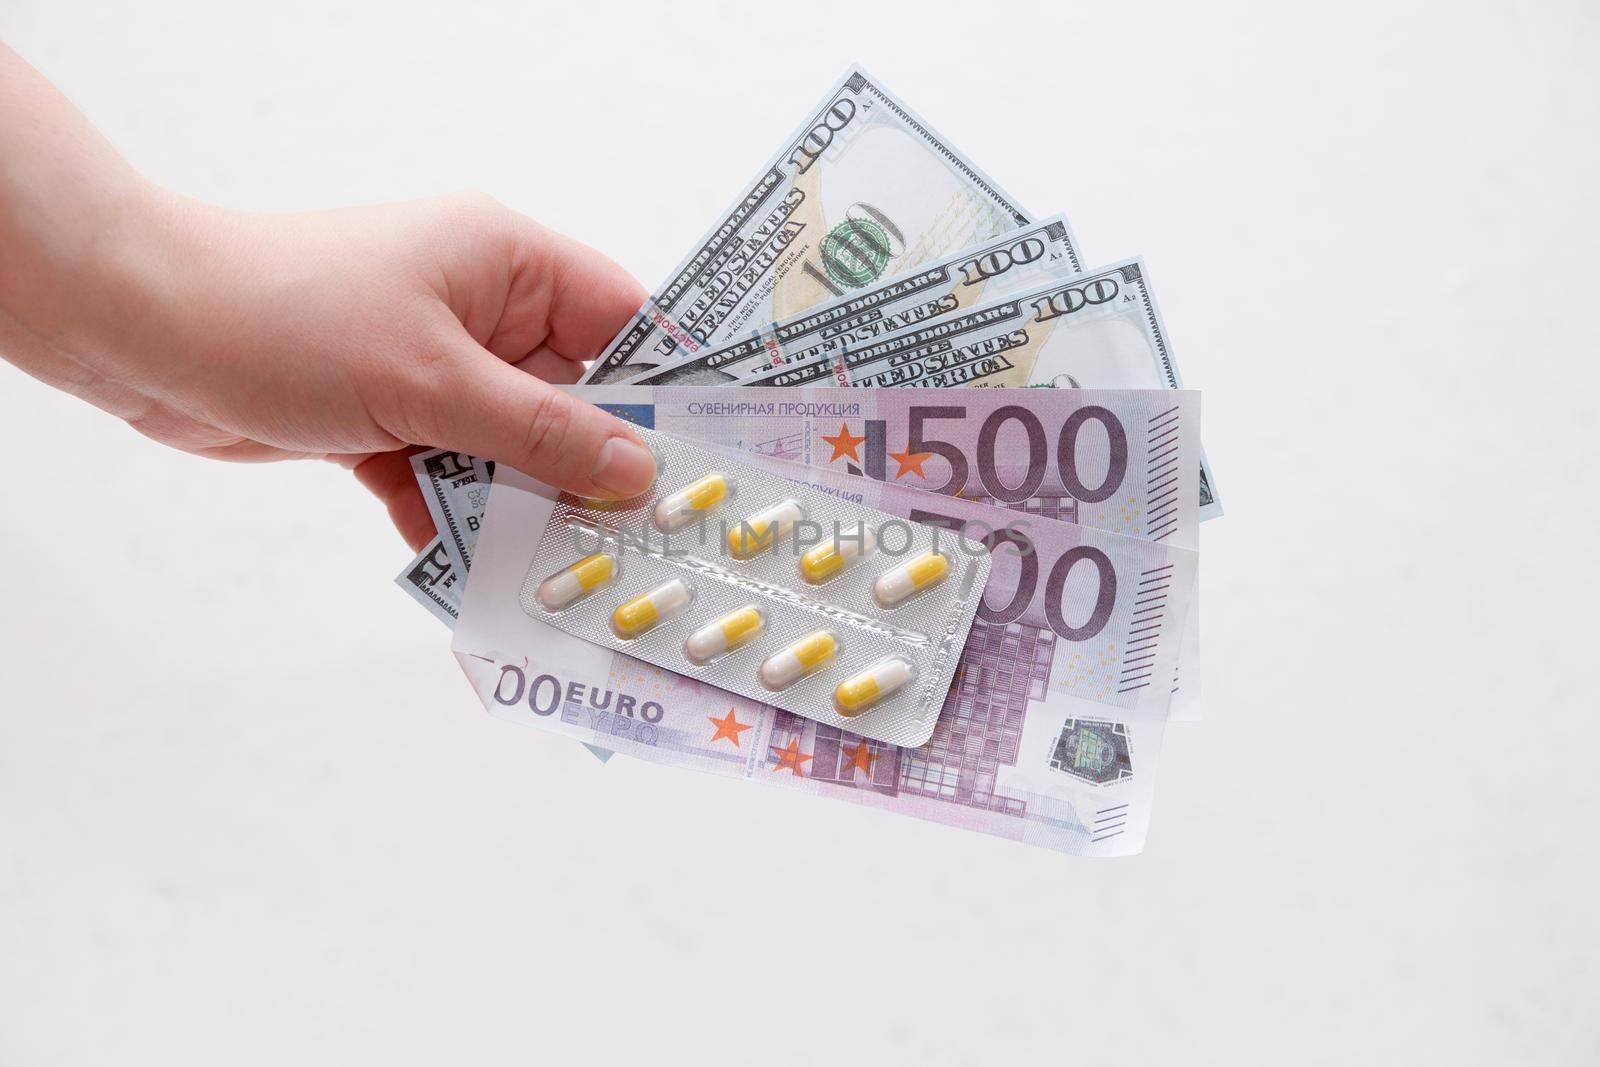 female hand holds a pack of yellow capsule pills and dollar bills euro and dollars, white background